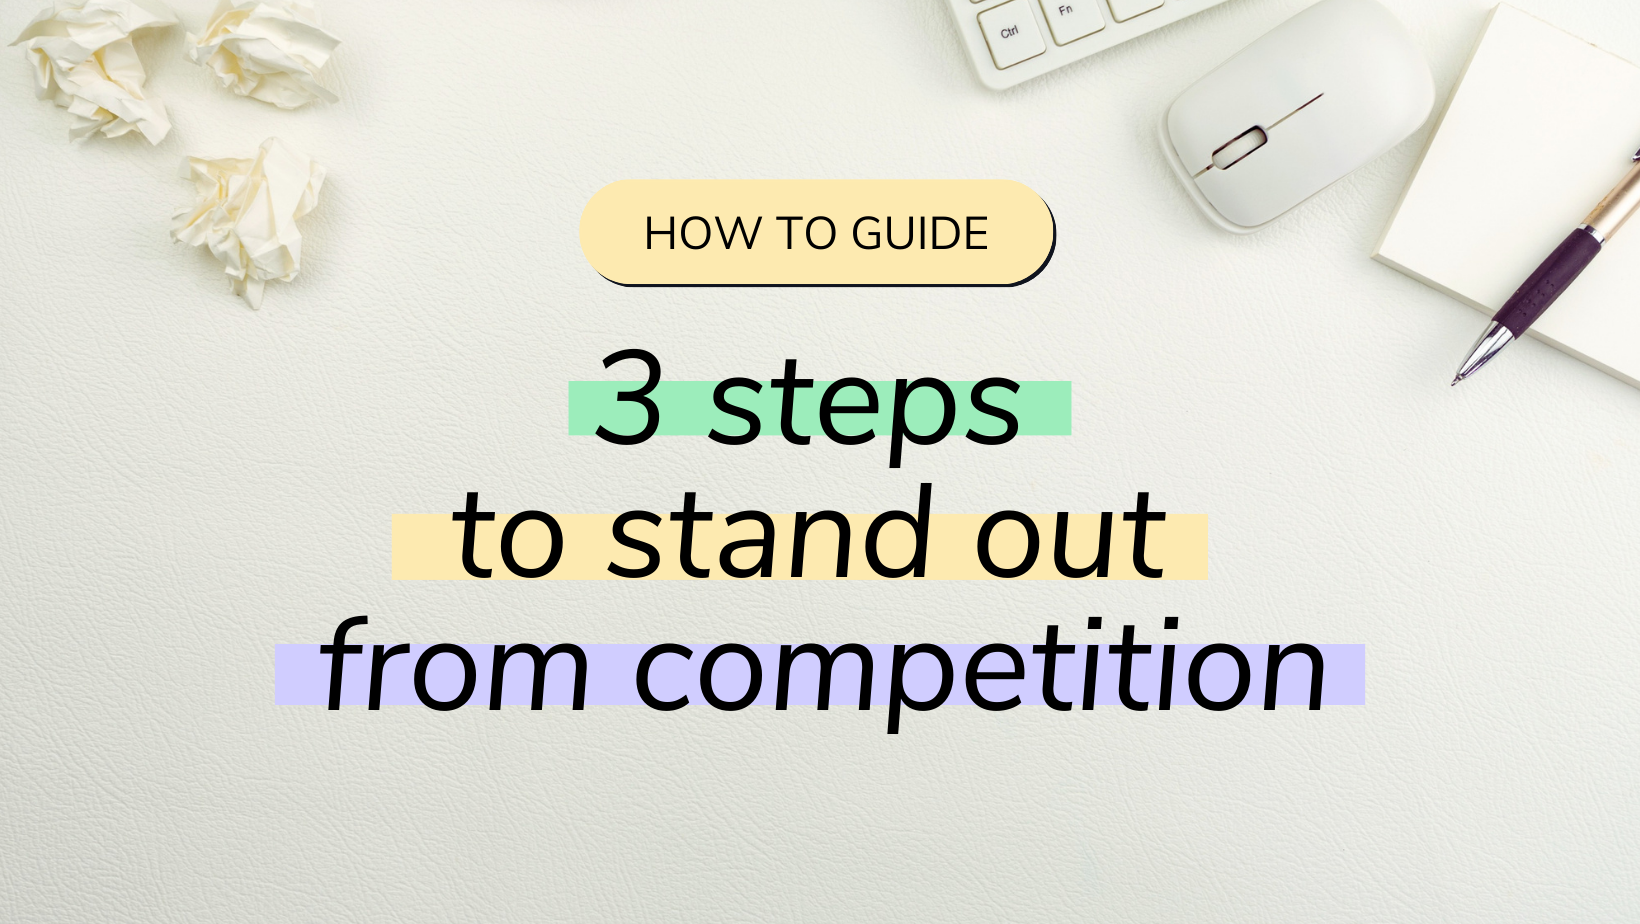 3 simple steps to stand out →